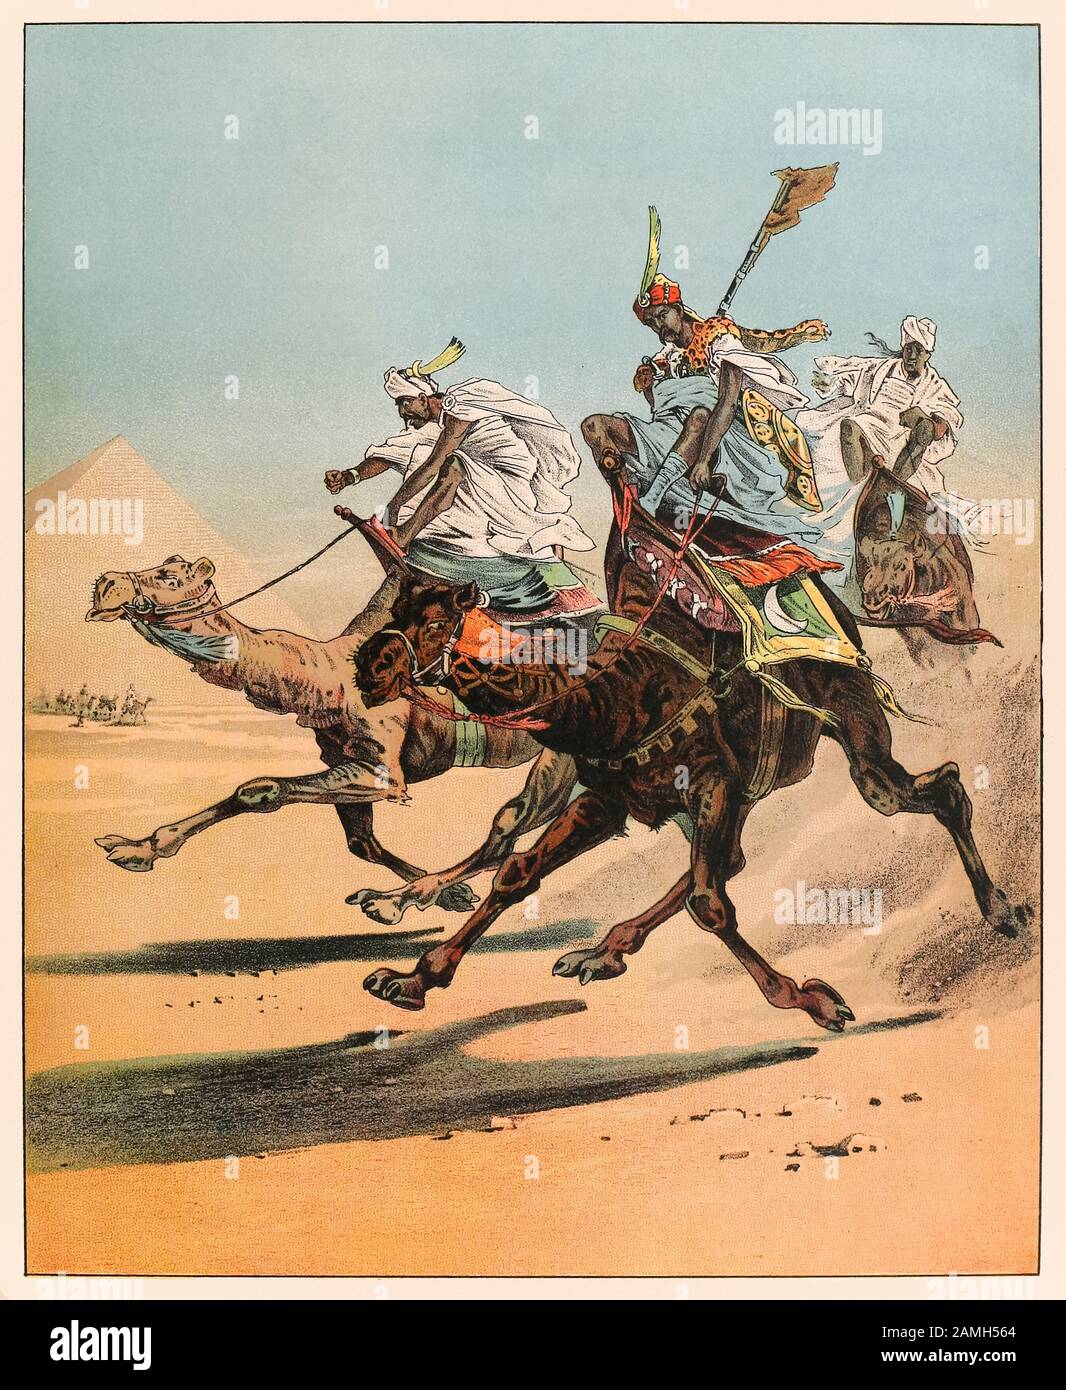 Arabs racing camels in Egypt from P.T. Barnum’s Menagerie published in 1888, illustration by Sarah J. Burke. Stock Photo